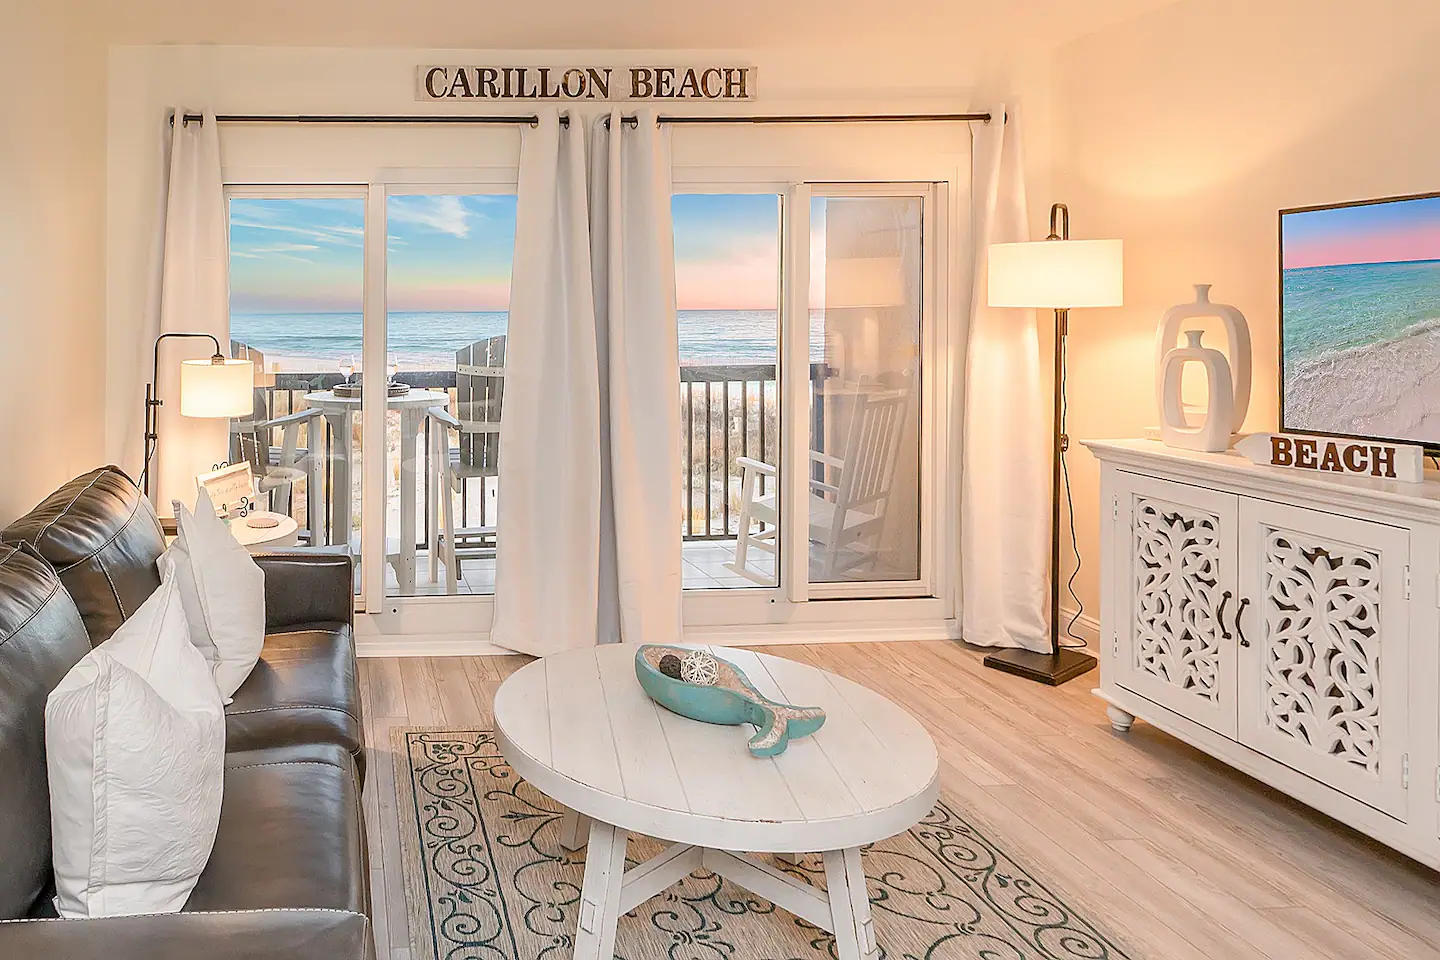 Living room view of Beachfront near 30A, a 30A luxury vacation home.